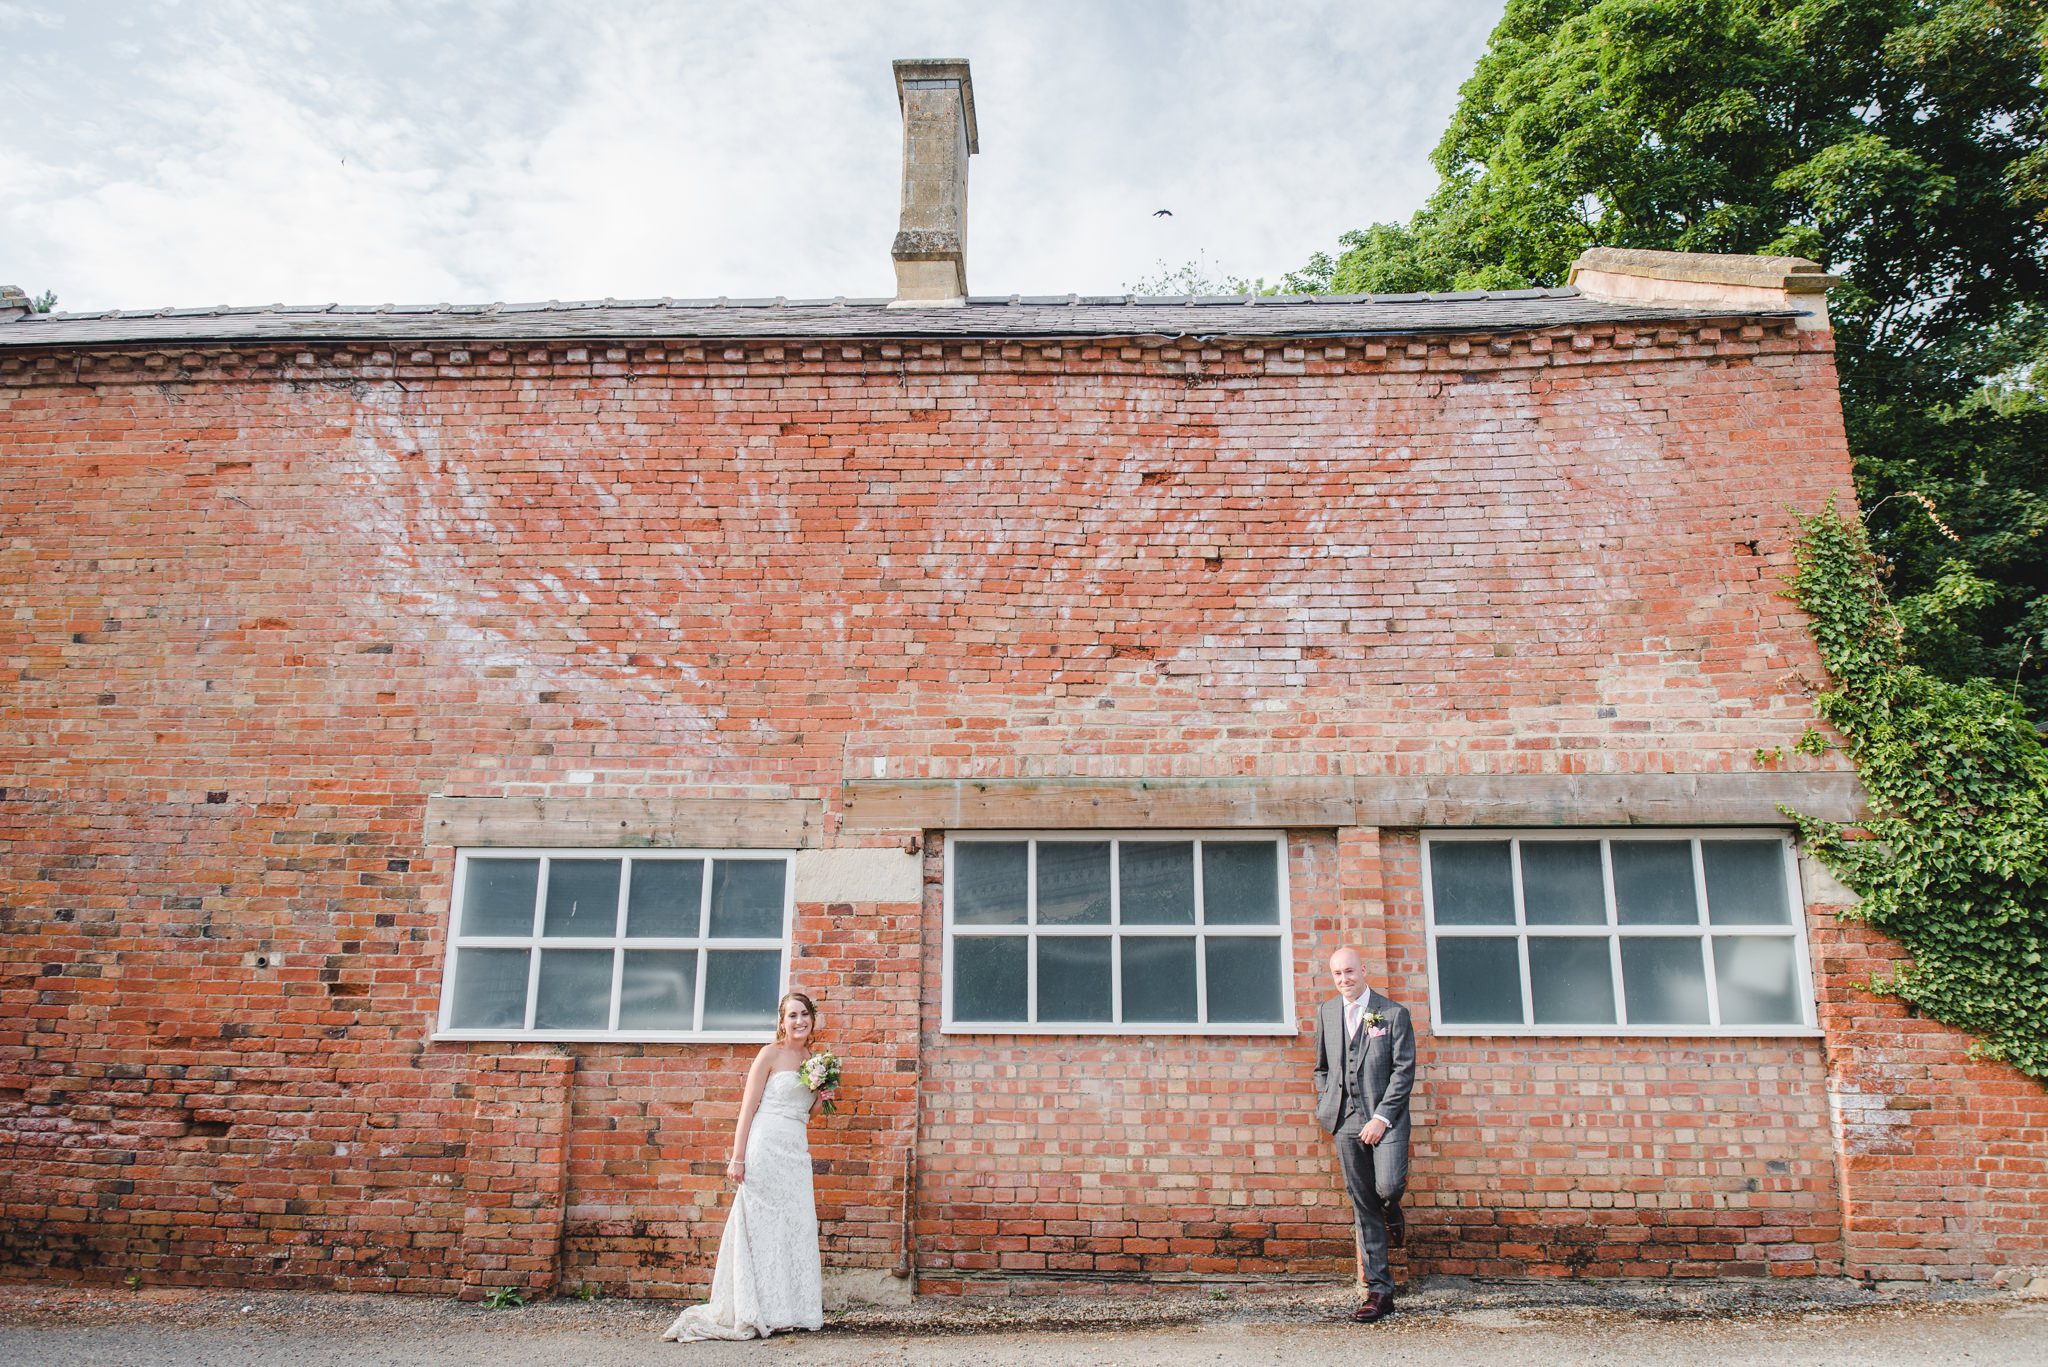 Bride and groom against an old brick wall